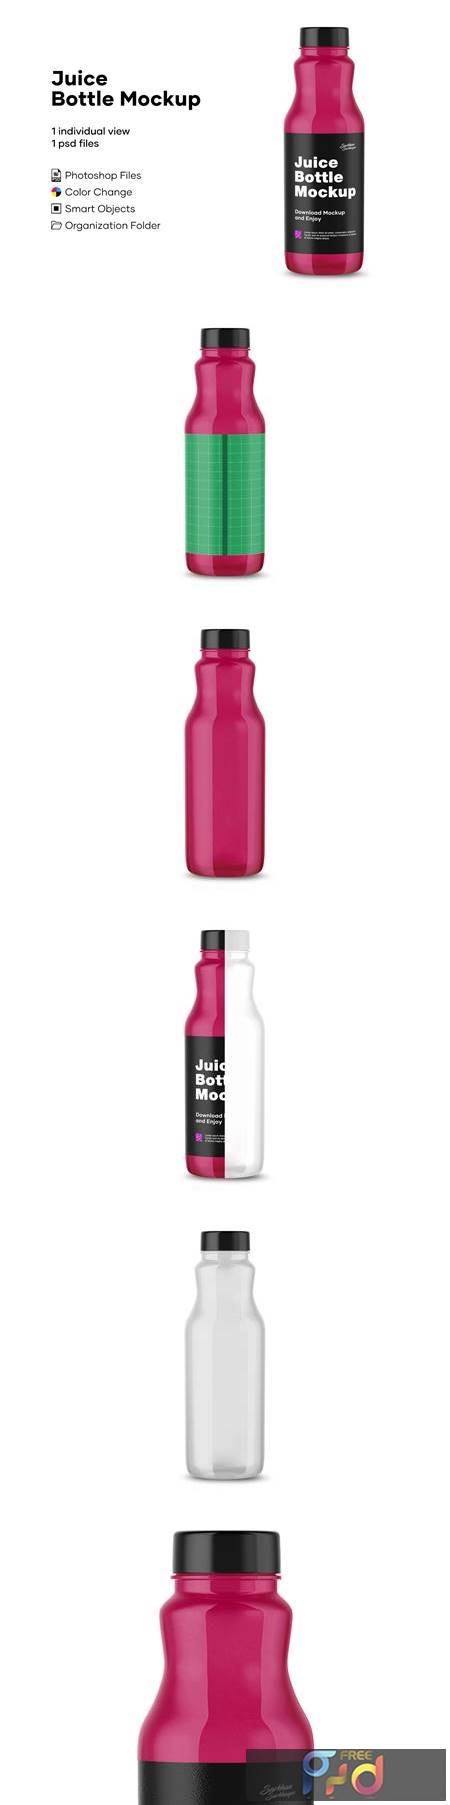 Clear Glass Bottle with Cherry Juice 4902442 1